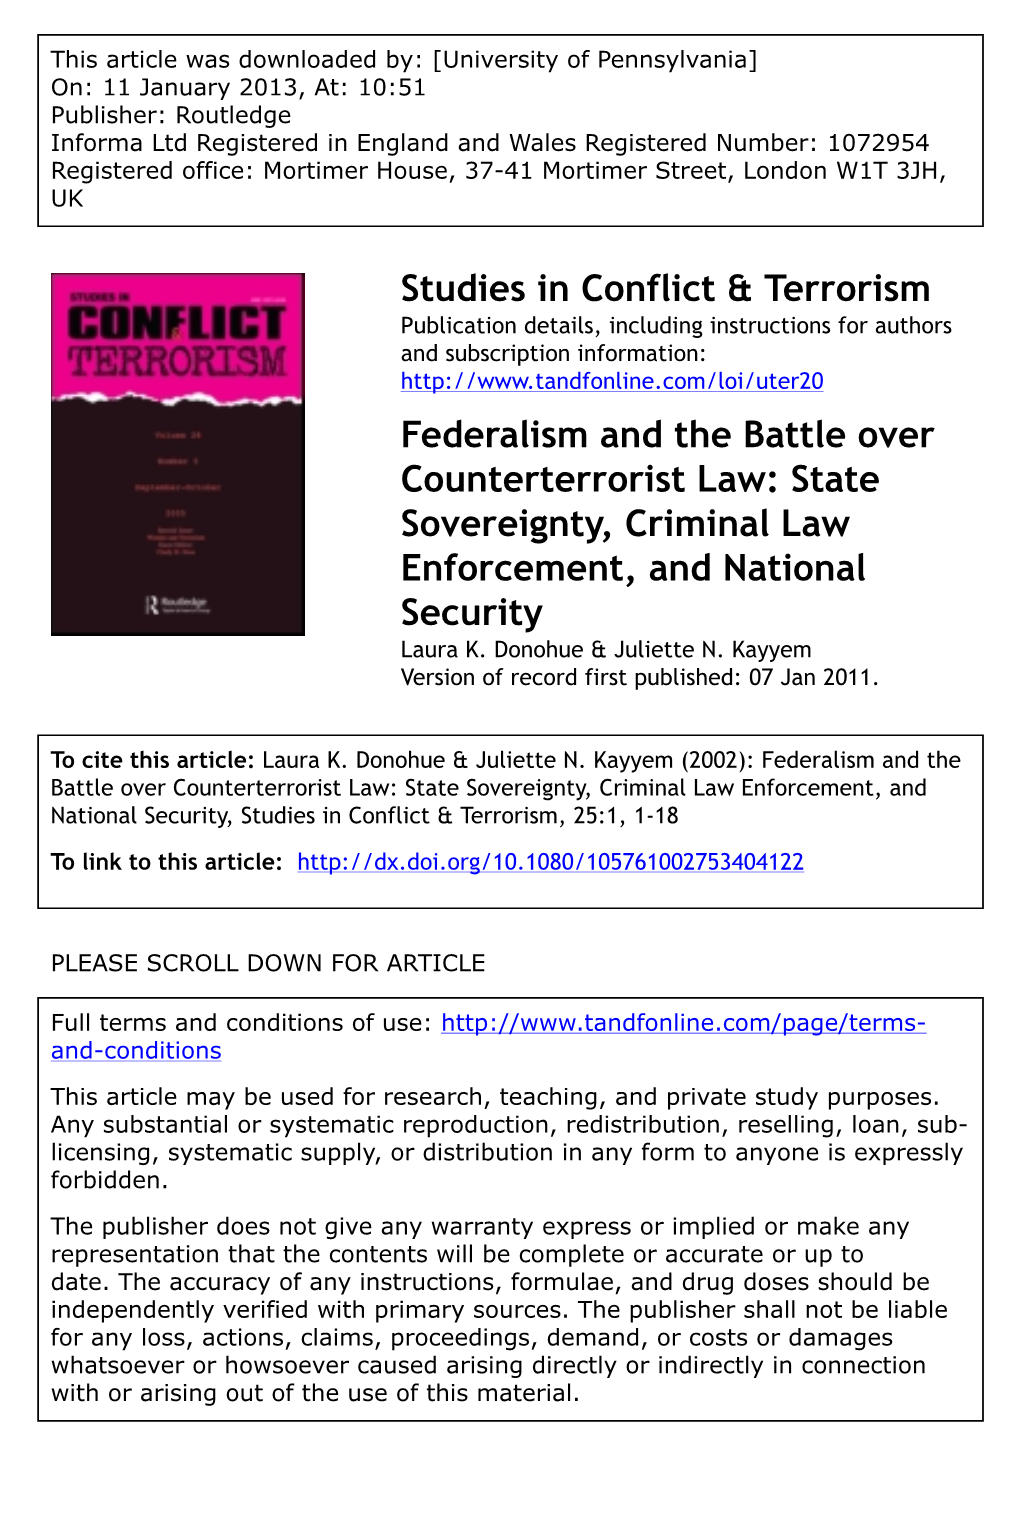 Federalism and the Battle Over Counterterrorist Law: State Sovereignty, Criminal Law Enforcement, and National Security Laura K